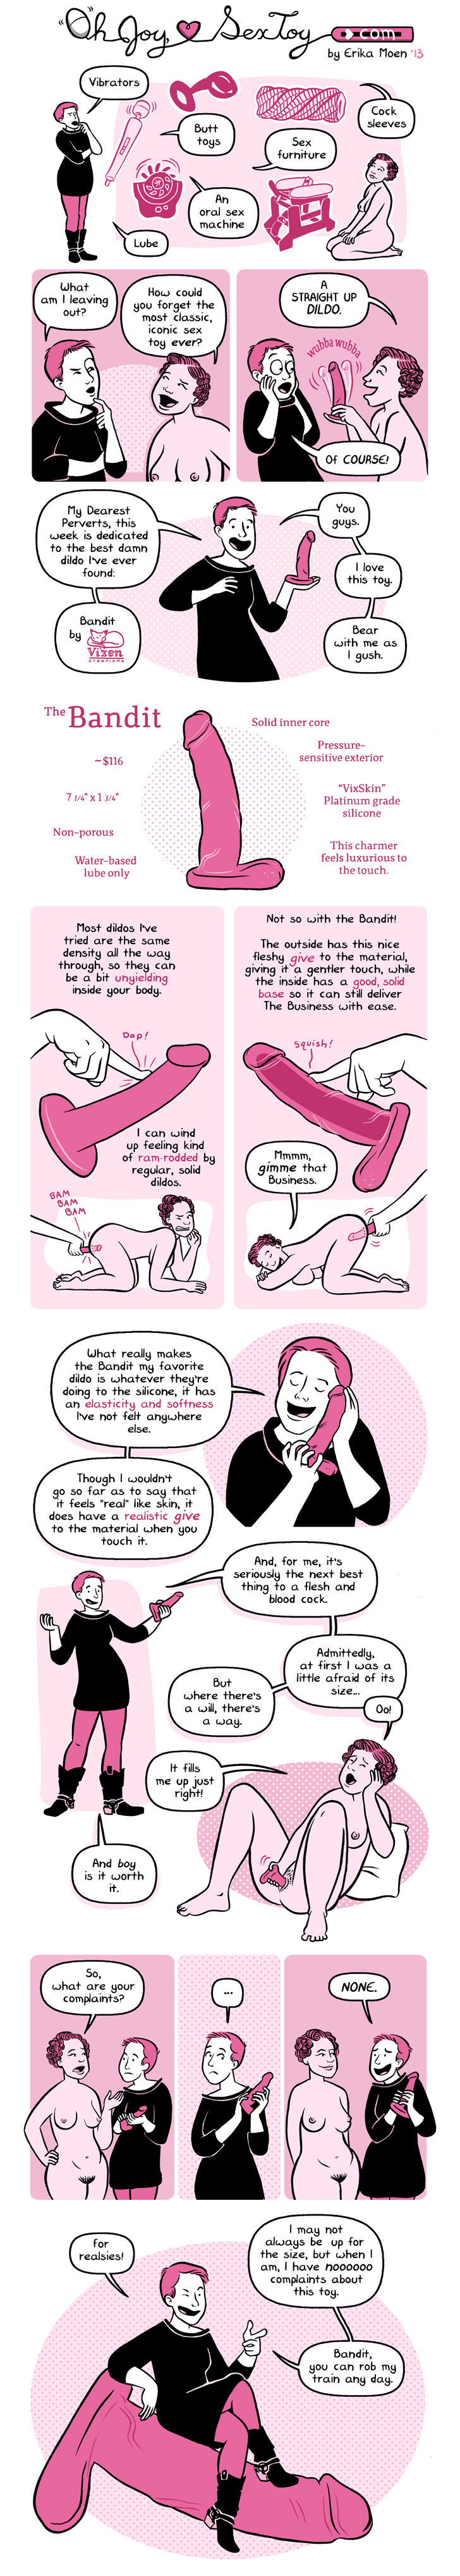 Erika's comic raves about the Bandit dildo, which she likes because it's rather flexible and well-made